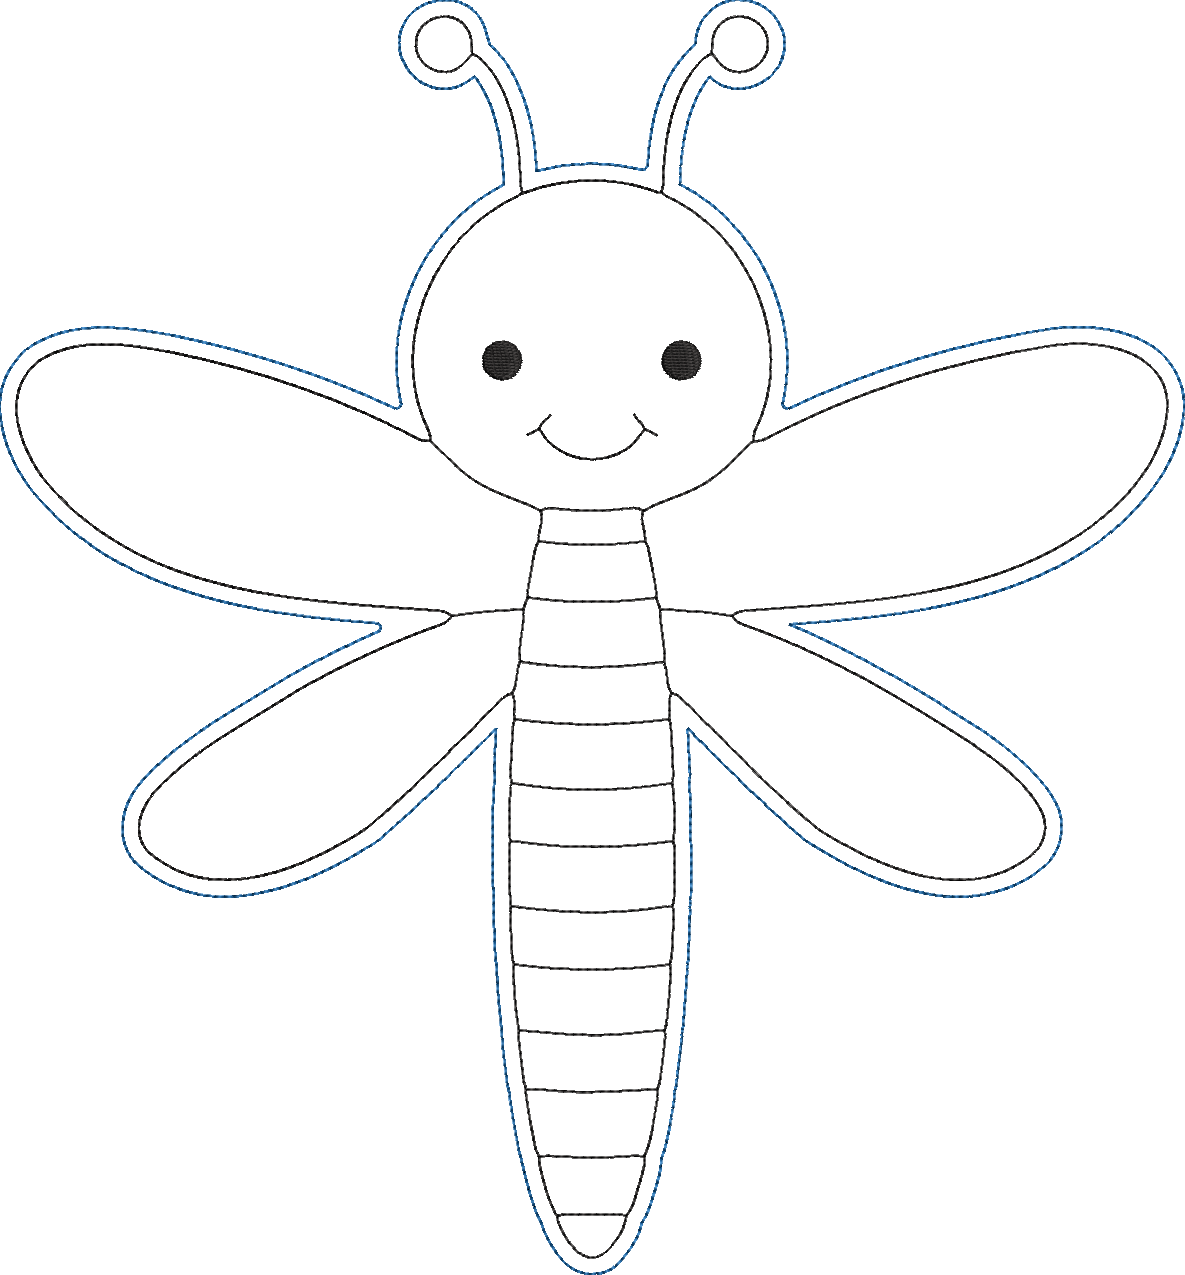 Bug Coloring Dolls - dragonfly Embroidery Design